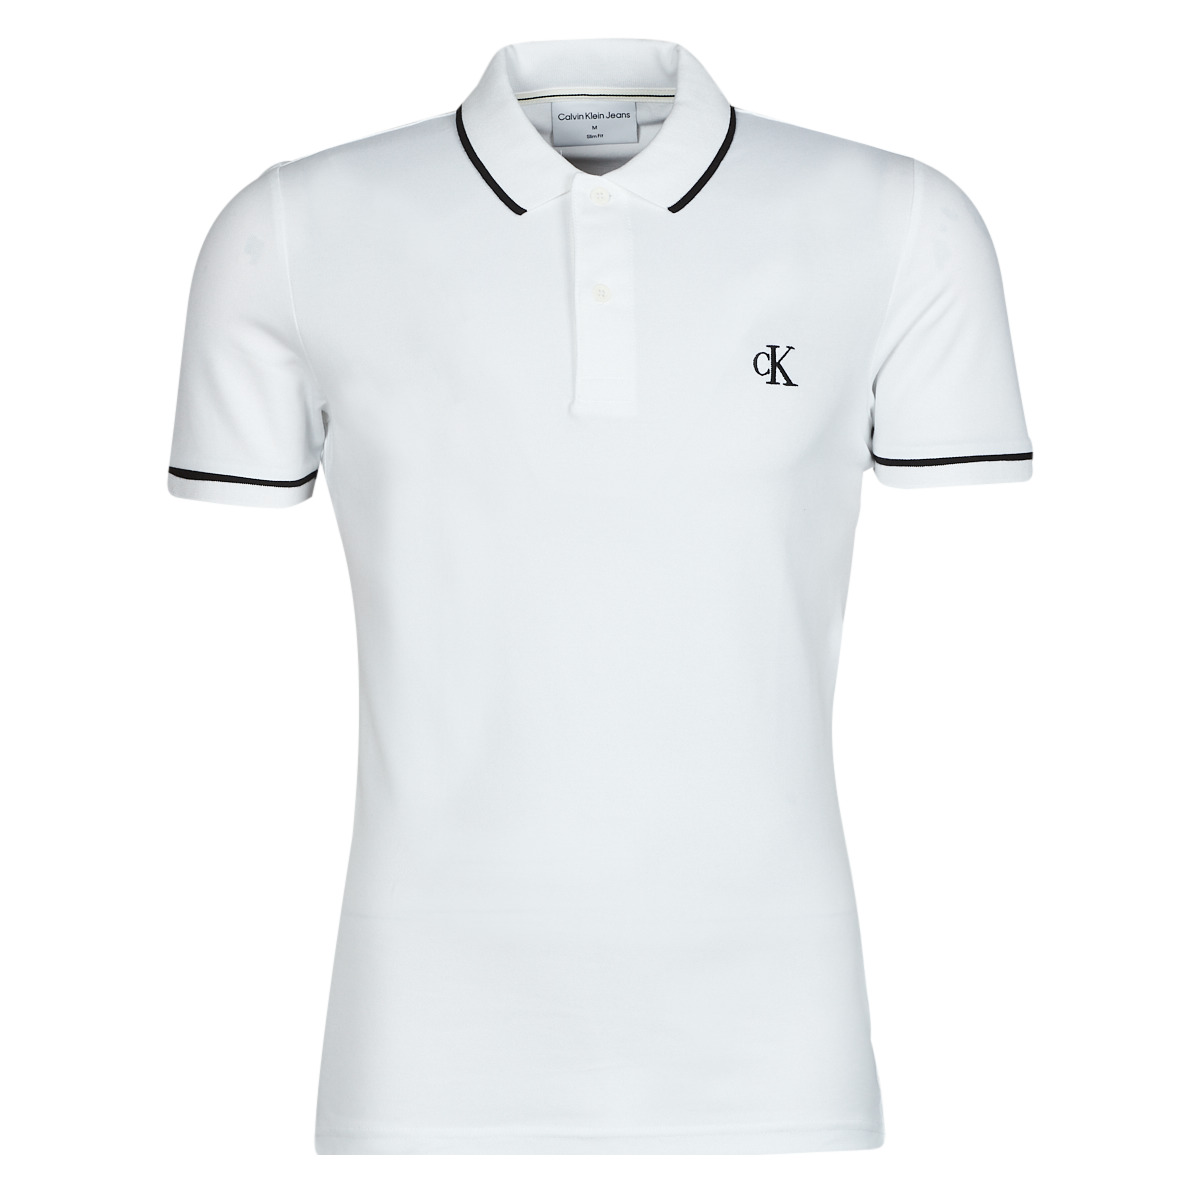 Calvin Klein Jeans TIPPING SLIM POLO White / Black - Free delivery |  Spartoo NET ! - Clothing short-sleeved polo shirts Men